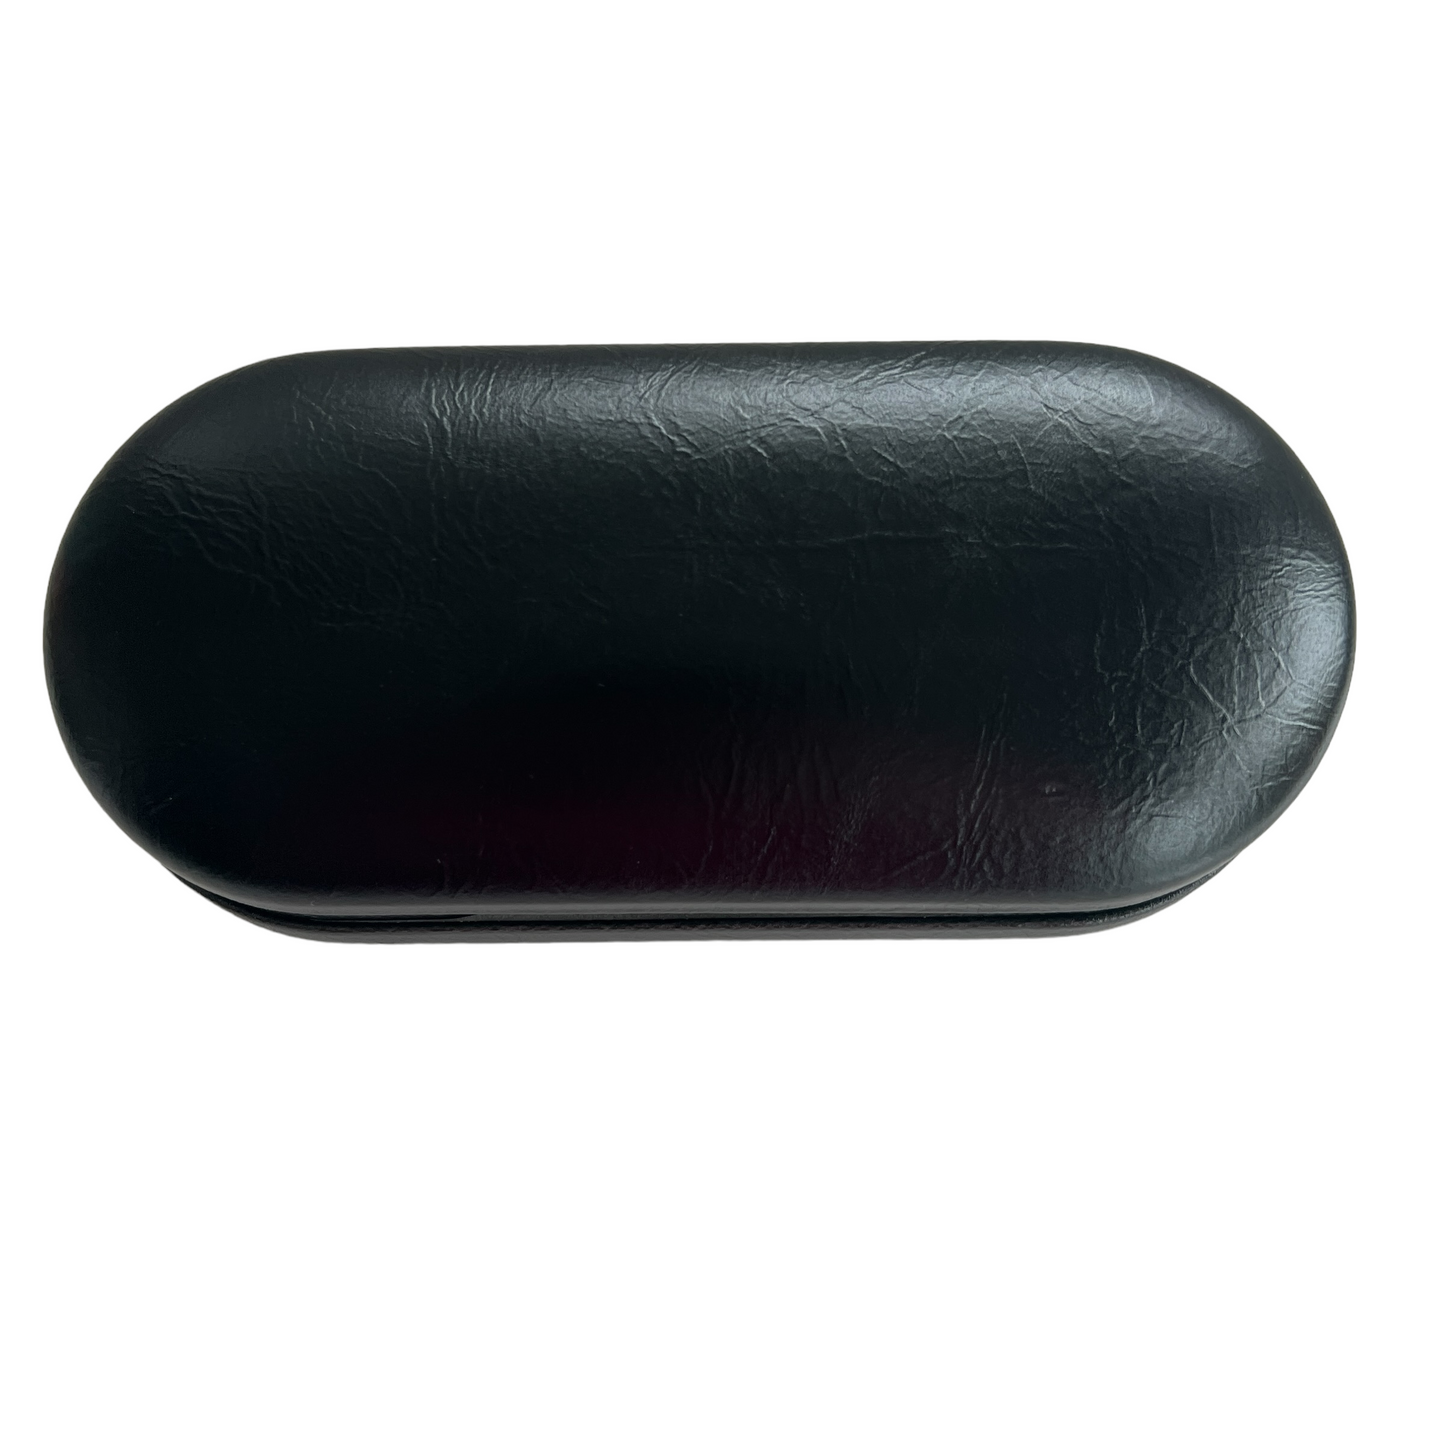 2-In-1 Contact Lens Glasses Case